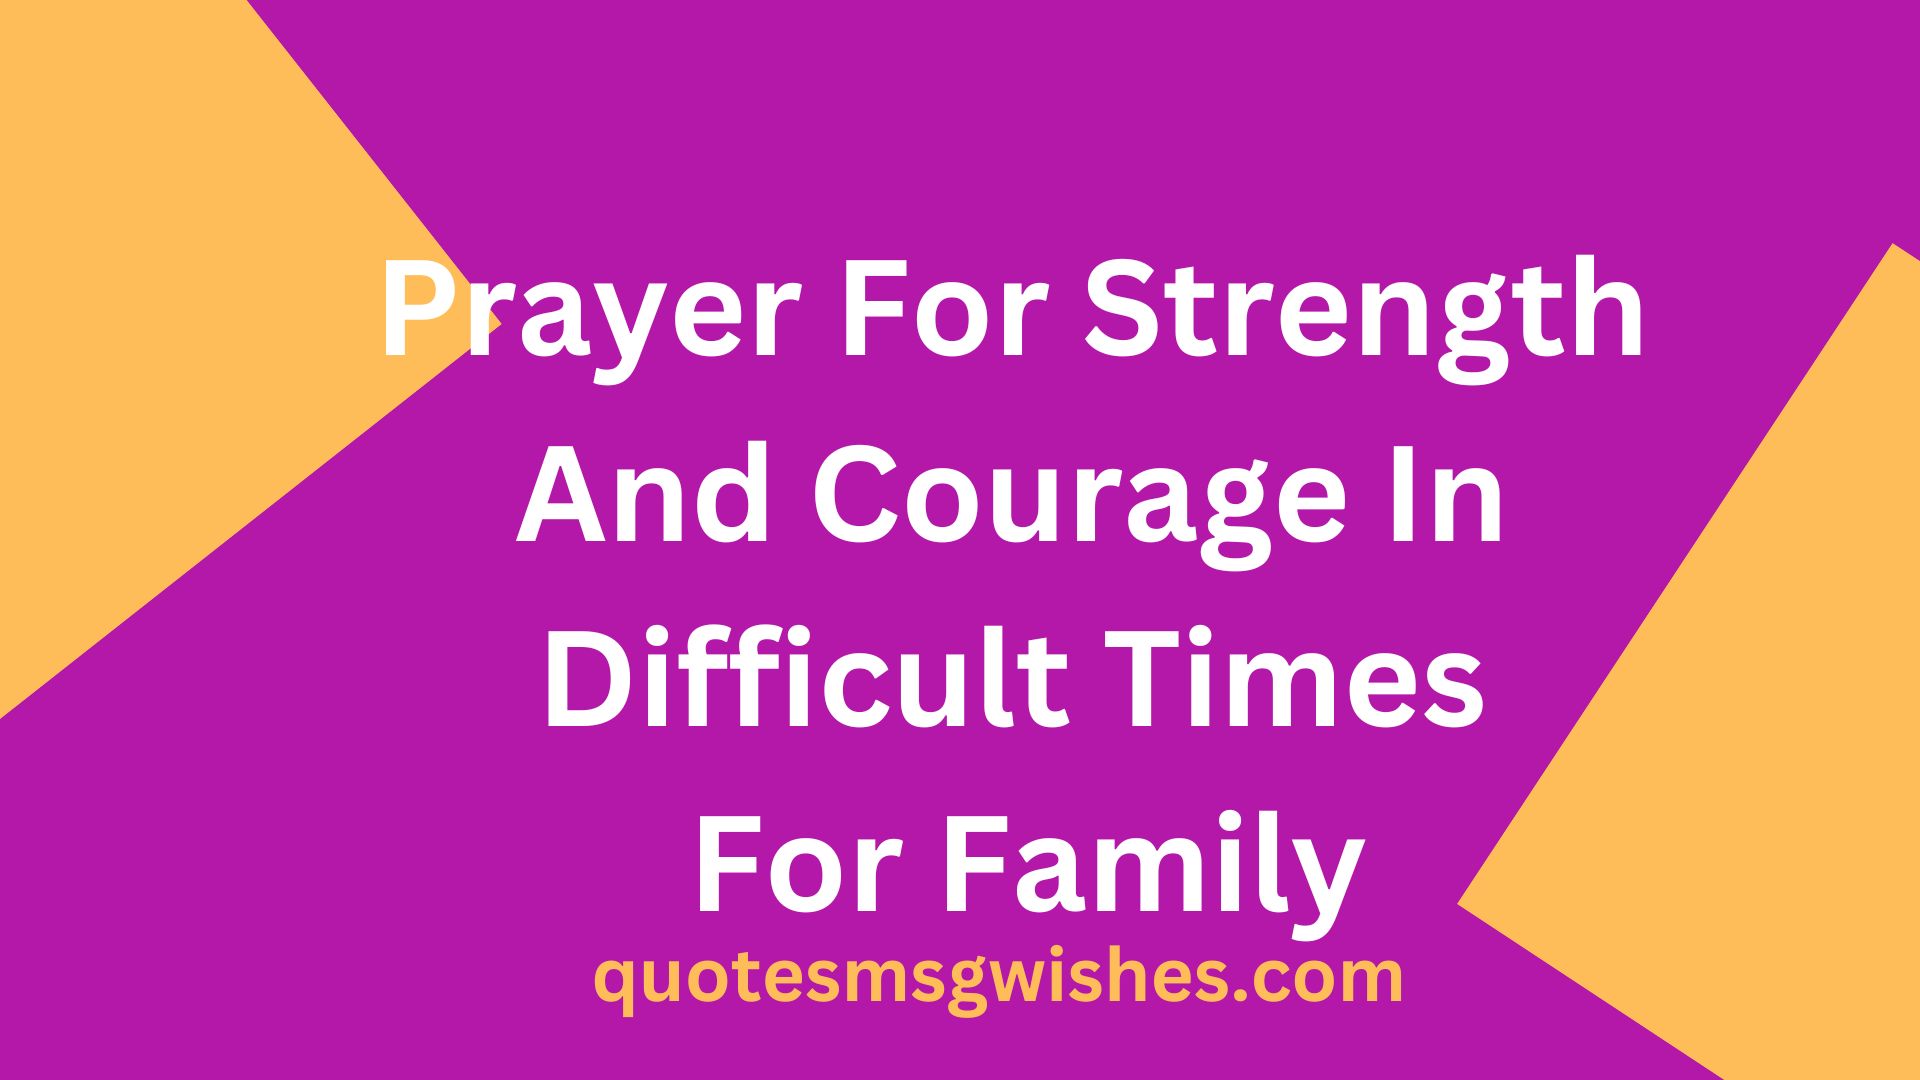 Prayer For Strength And Courage In Difficult Times For Family